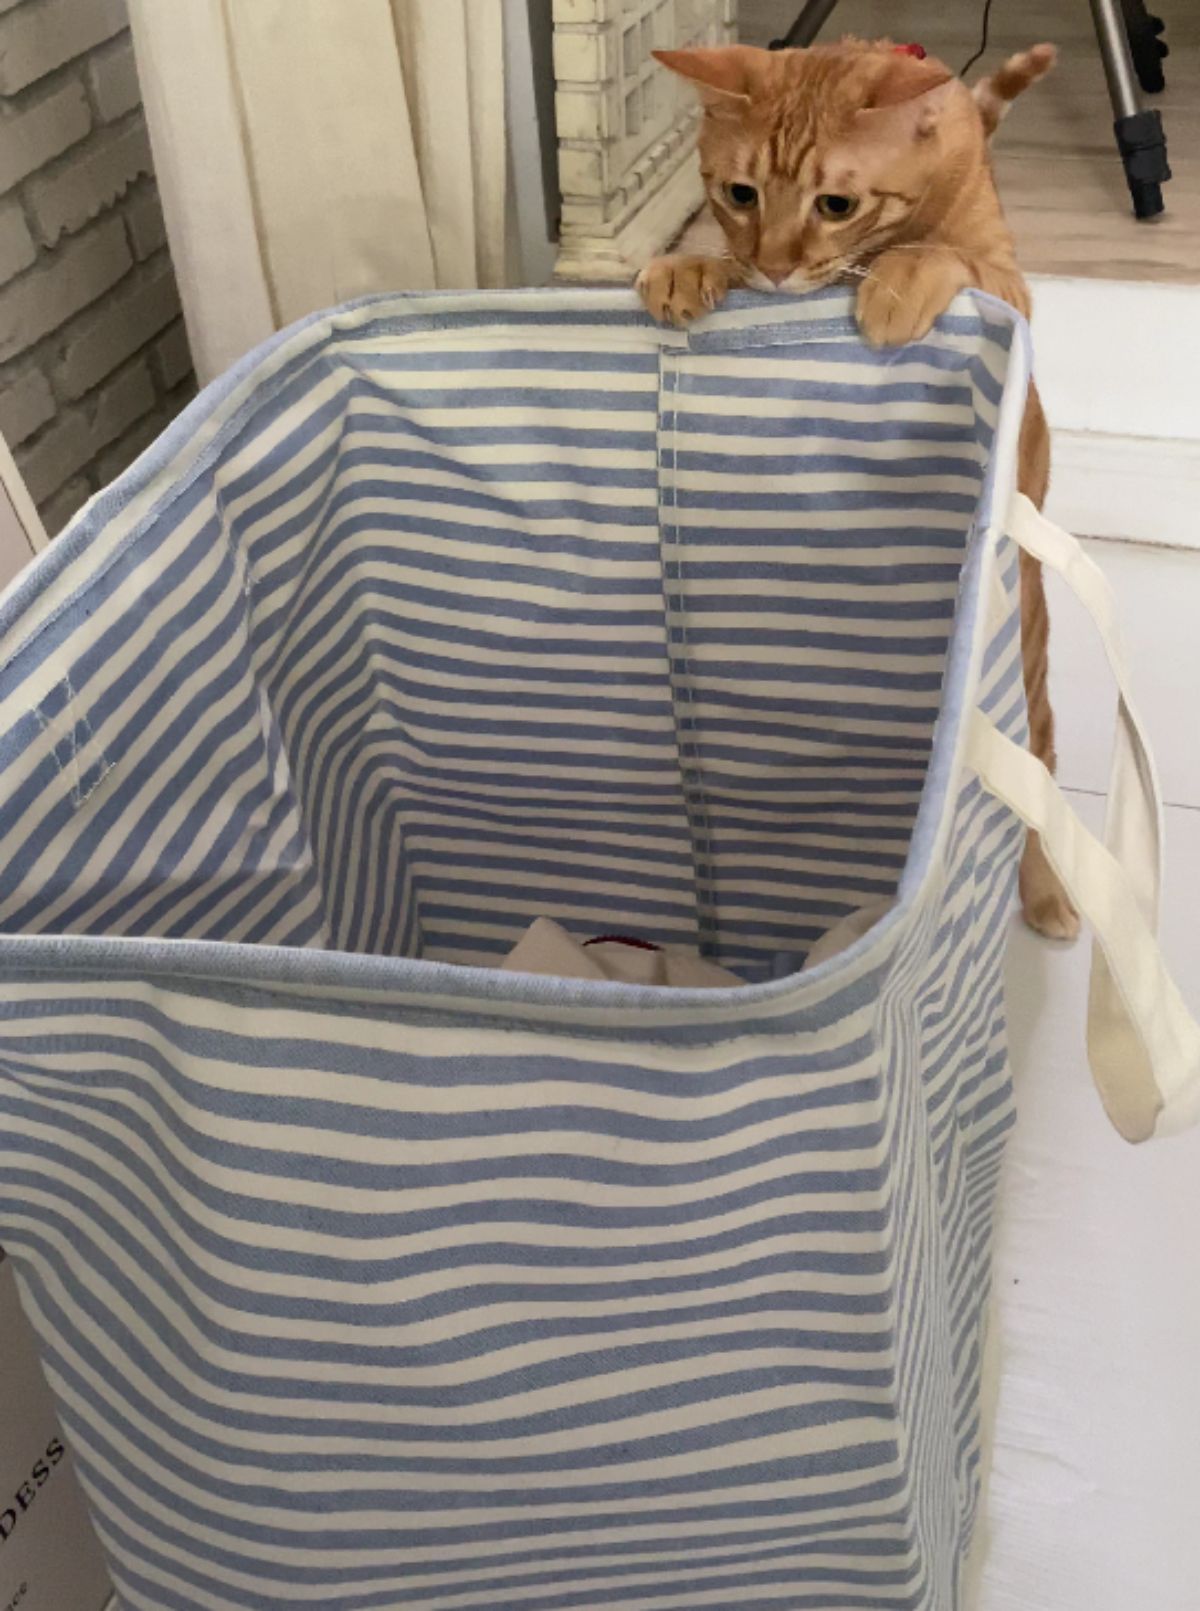 orange cat standing on hind legs with the front legs placed on the edge of a blue and white laundry hamper